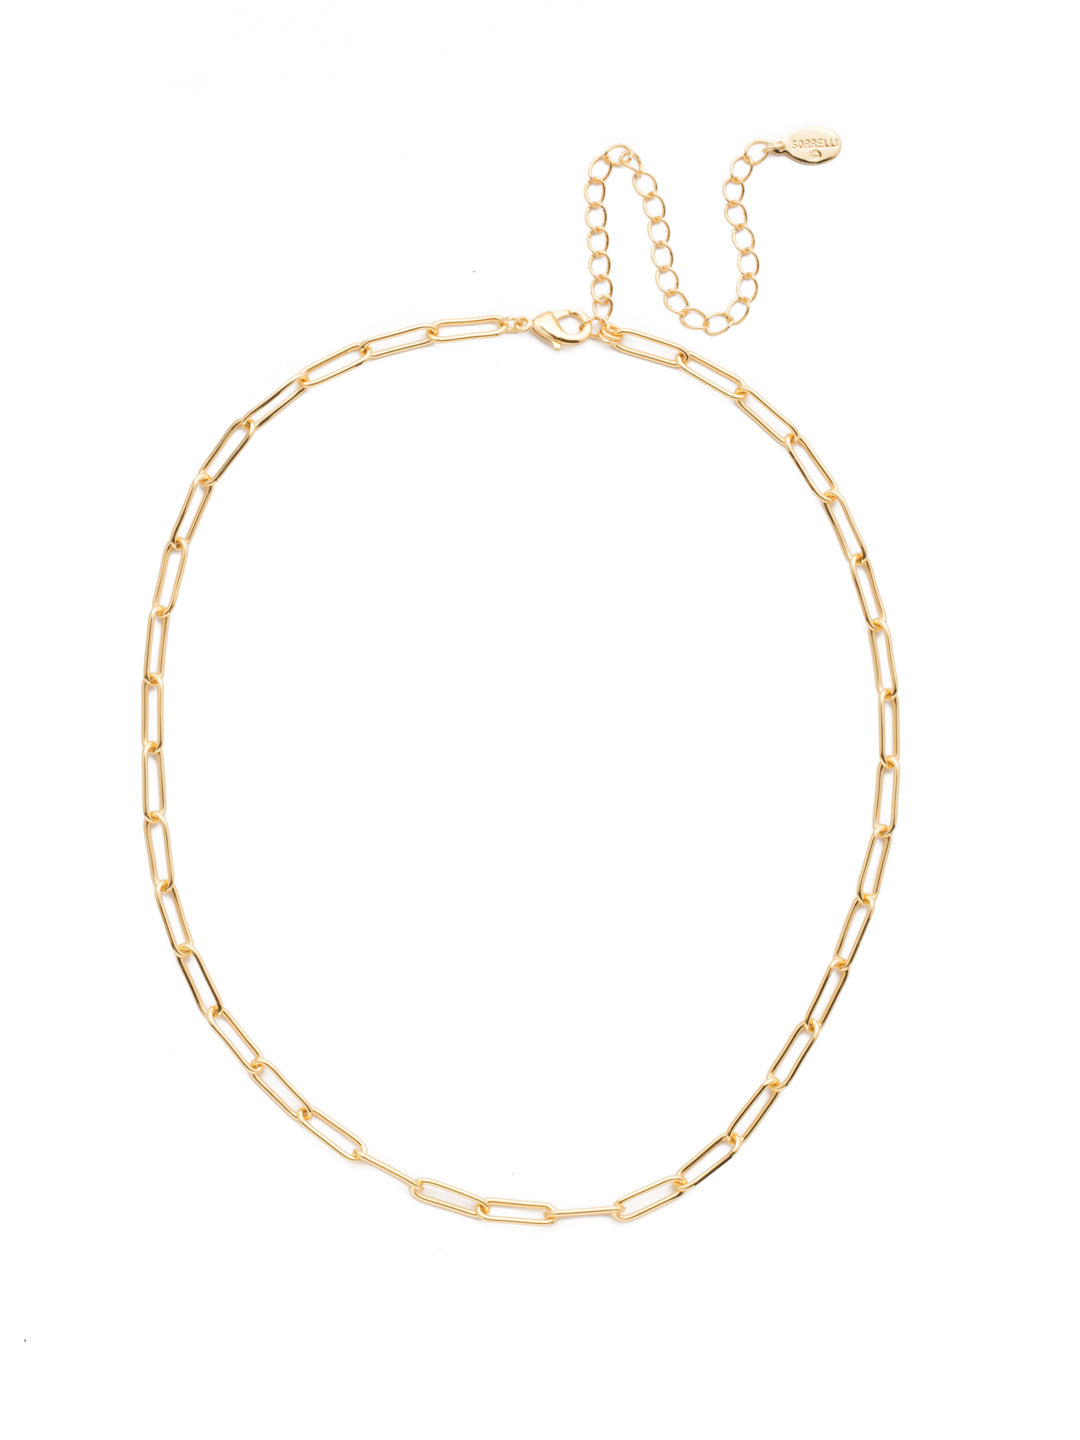 Jacinda Tennis Necklace - 4NES13BGCRY - <p>The Jacinda Tennis Necklace is our take on the paperclip link trend. It's a simple stunner you can wear for years and years to come. From Sorrelli's Crystal collection in our Bright Gold-tone finish.</p>